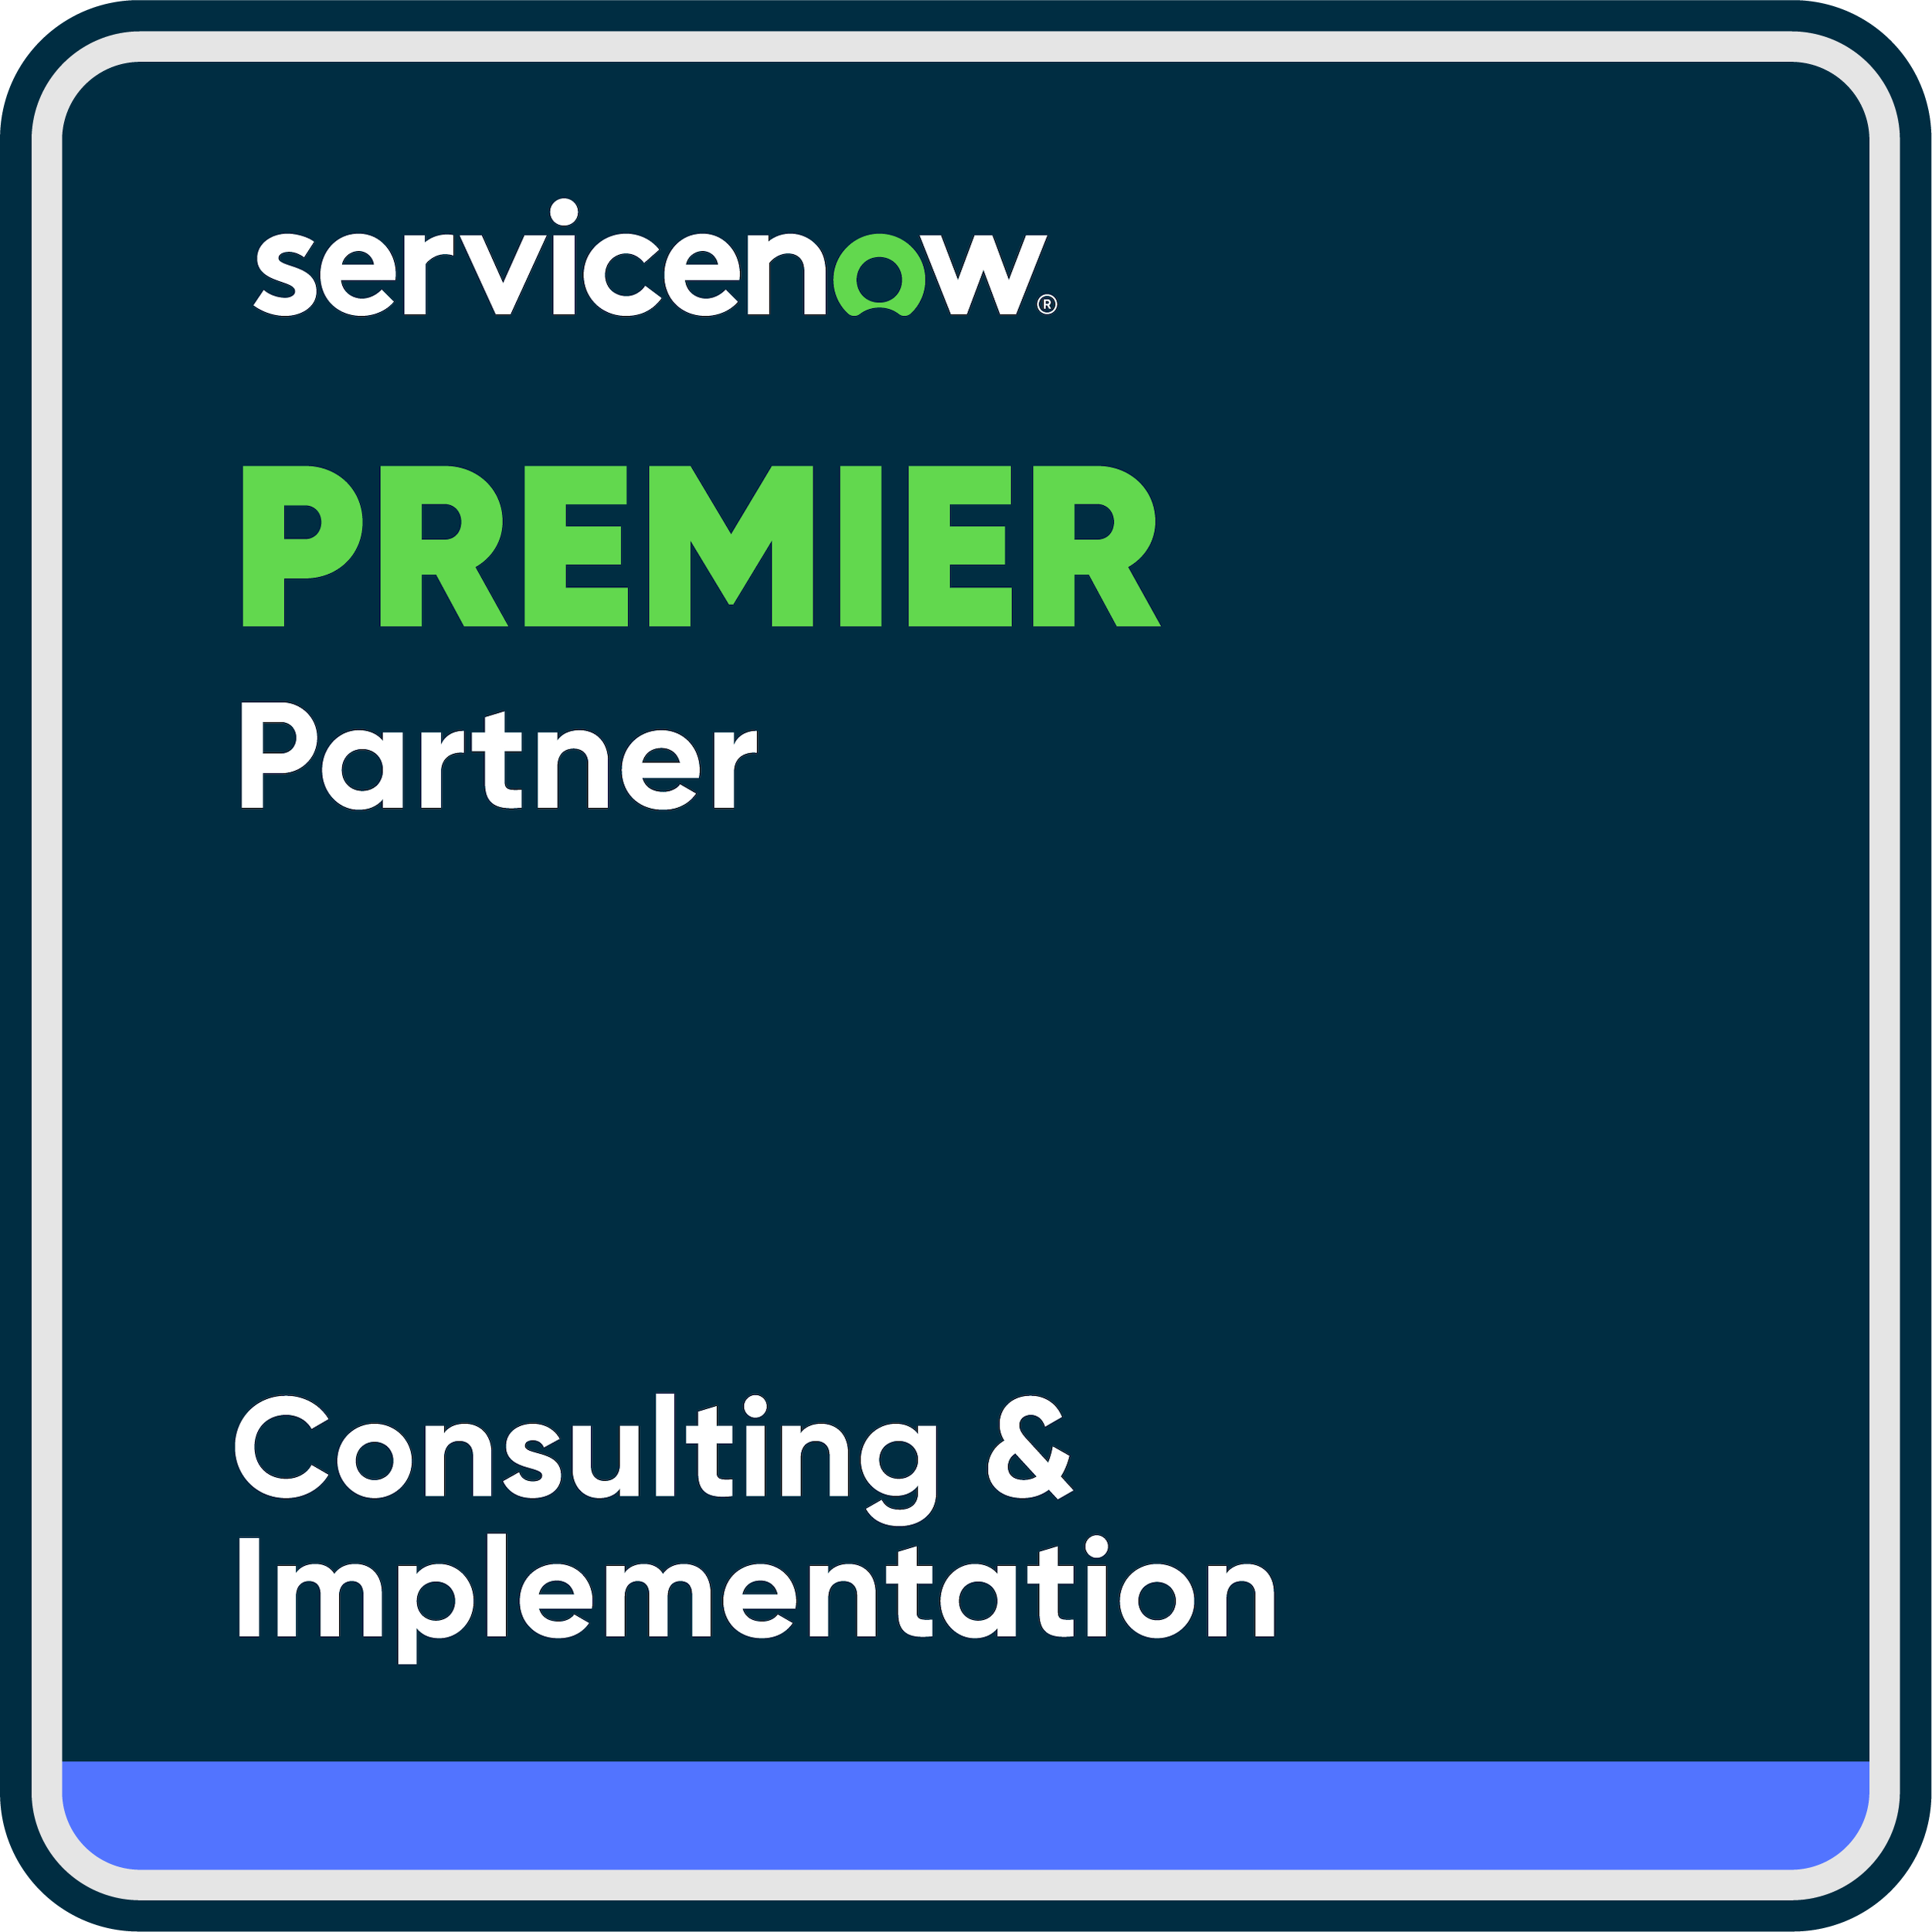 ServiceNow Premier Partner-Consulting&Implementation